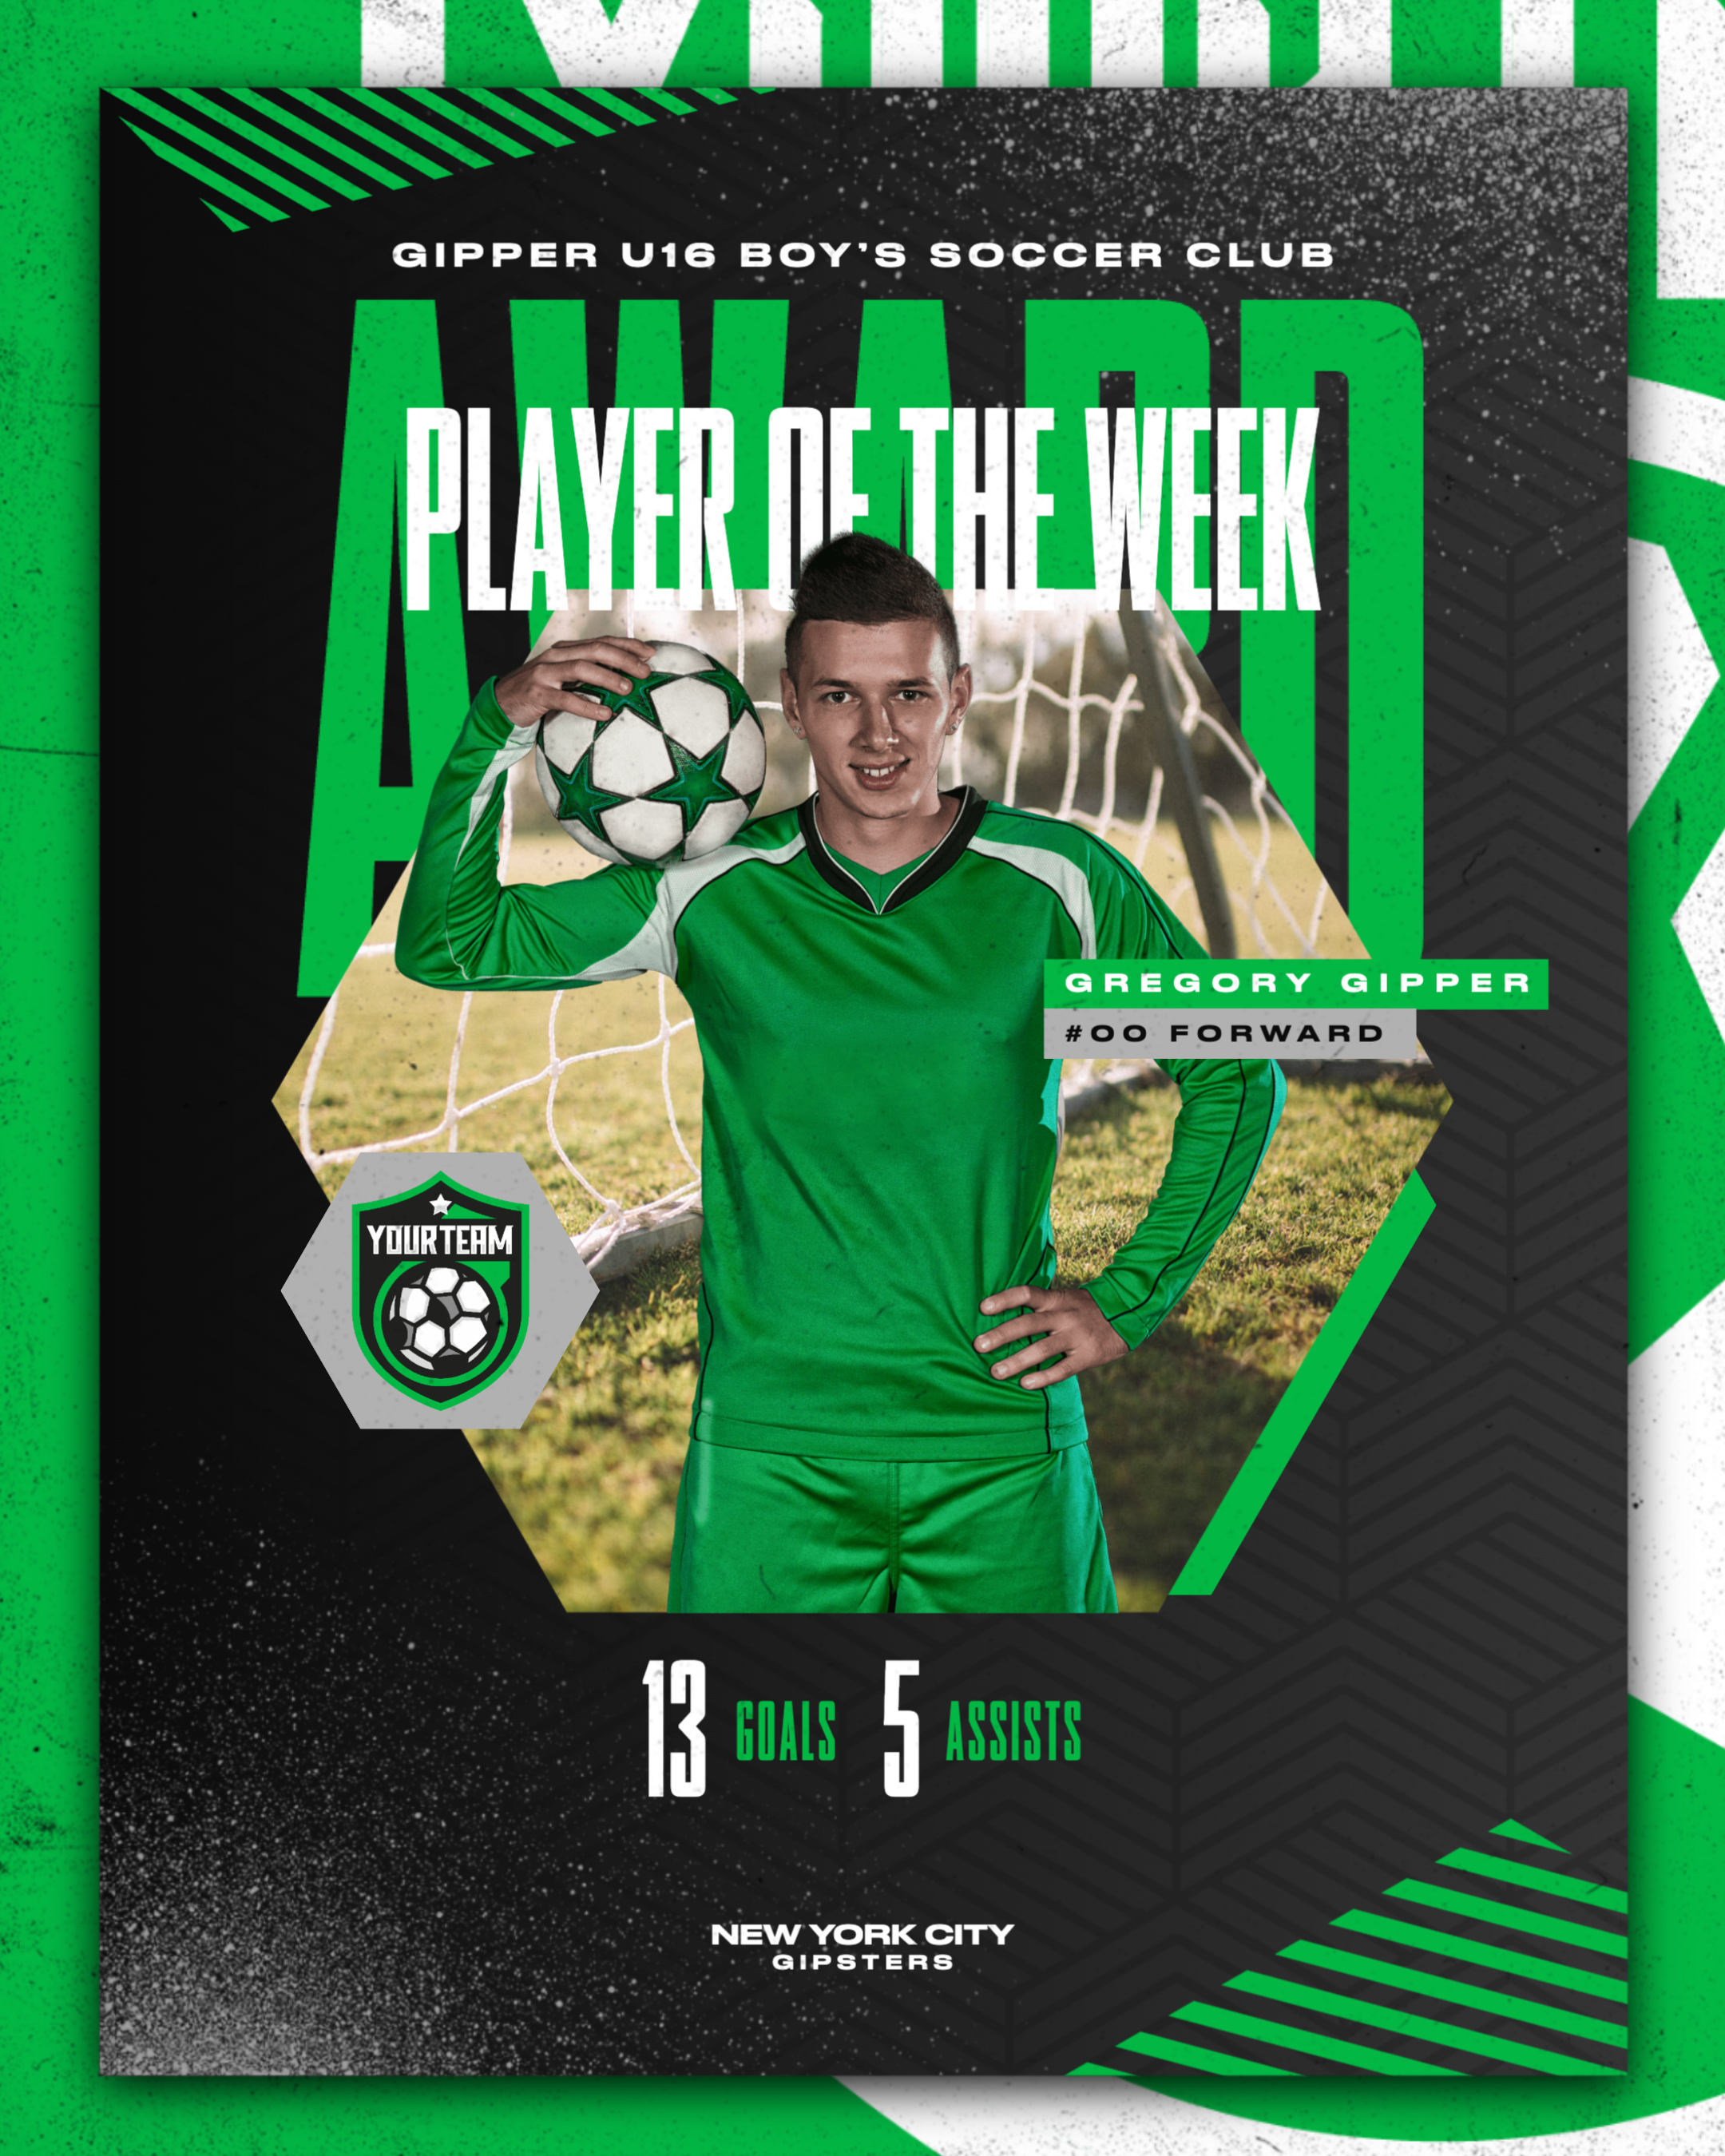 Gipper player of the week award graphic template featuring young male club soccer player with "player of the week" text and game stats